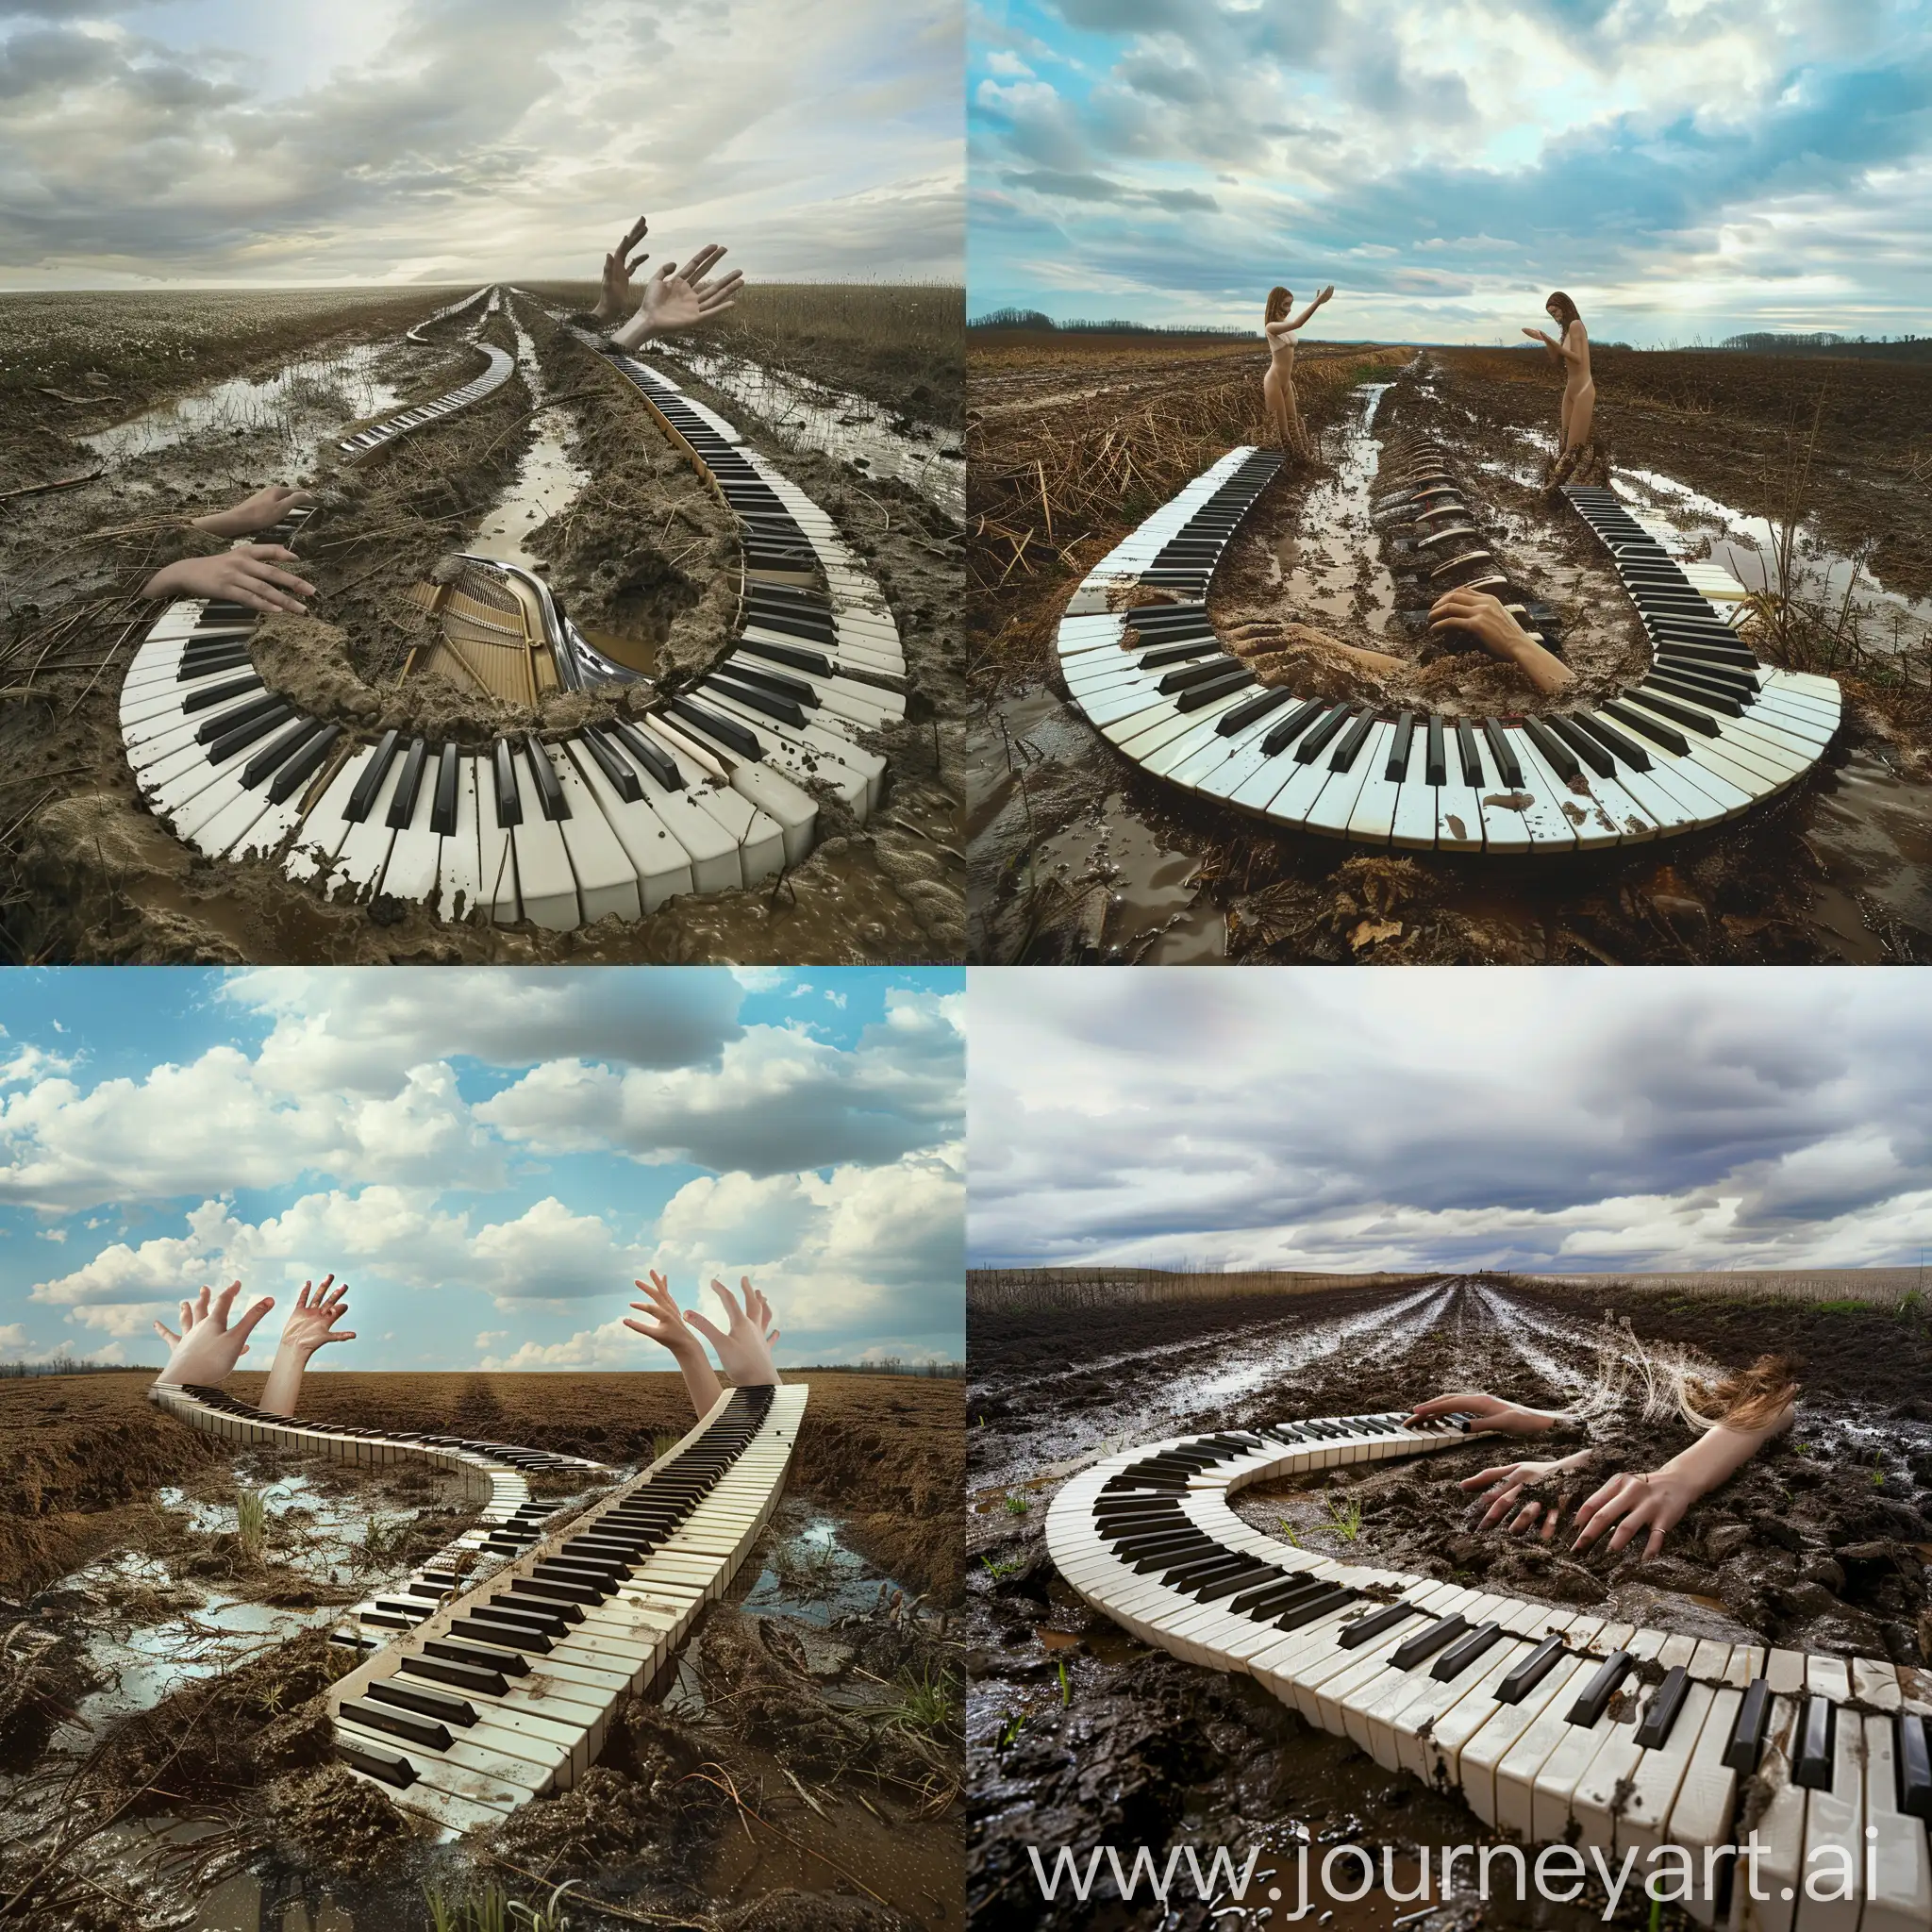 Infinite-Surreal-Piano-Keyboard-in-a-Spring-Field-with-Feminine-Hands